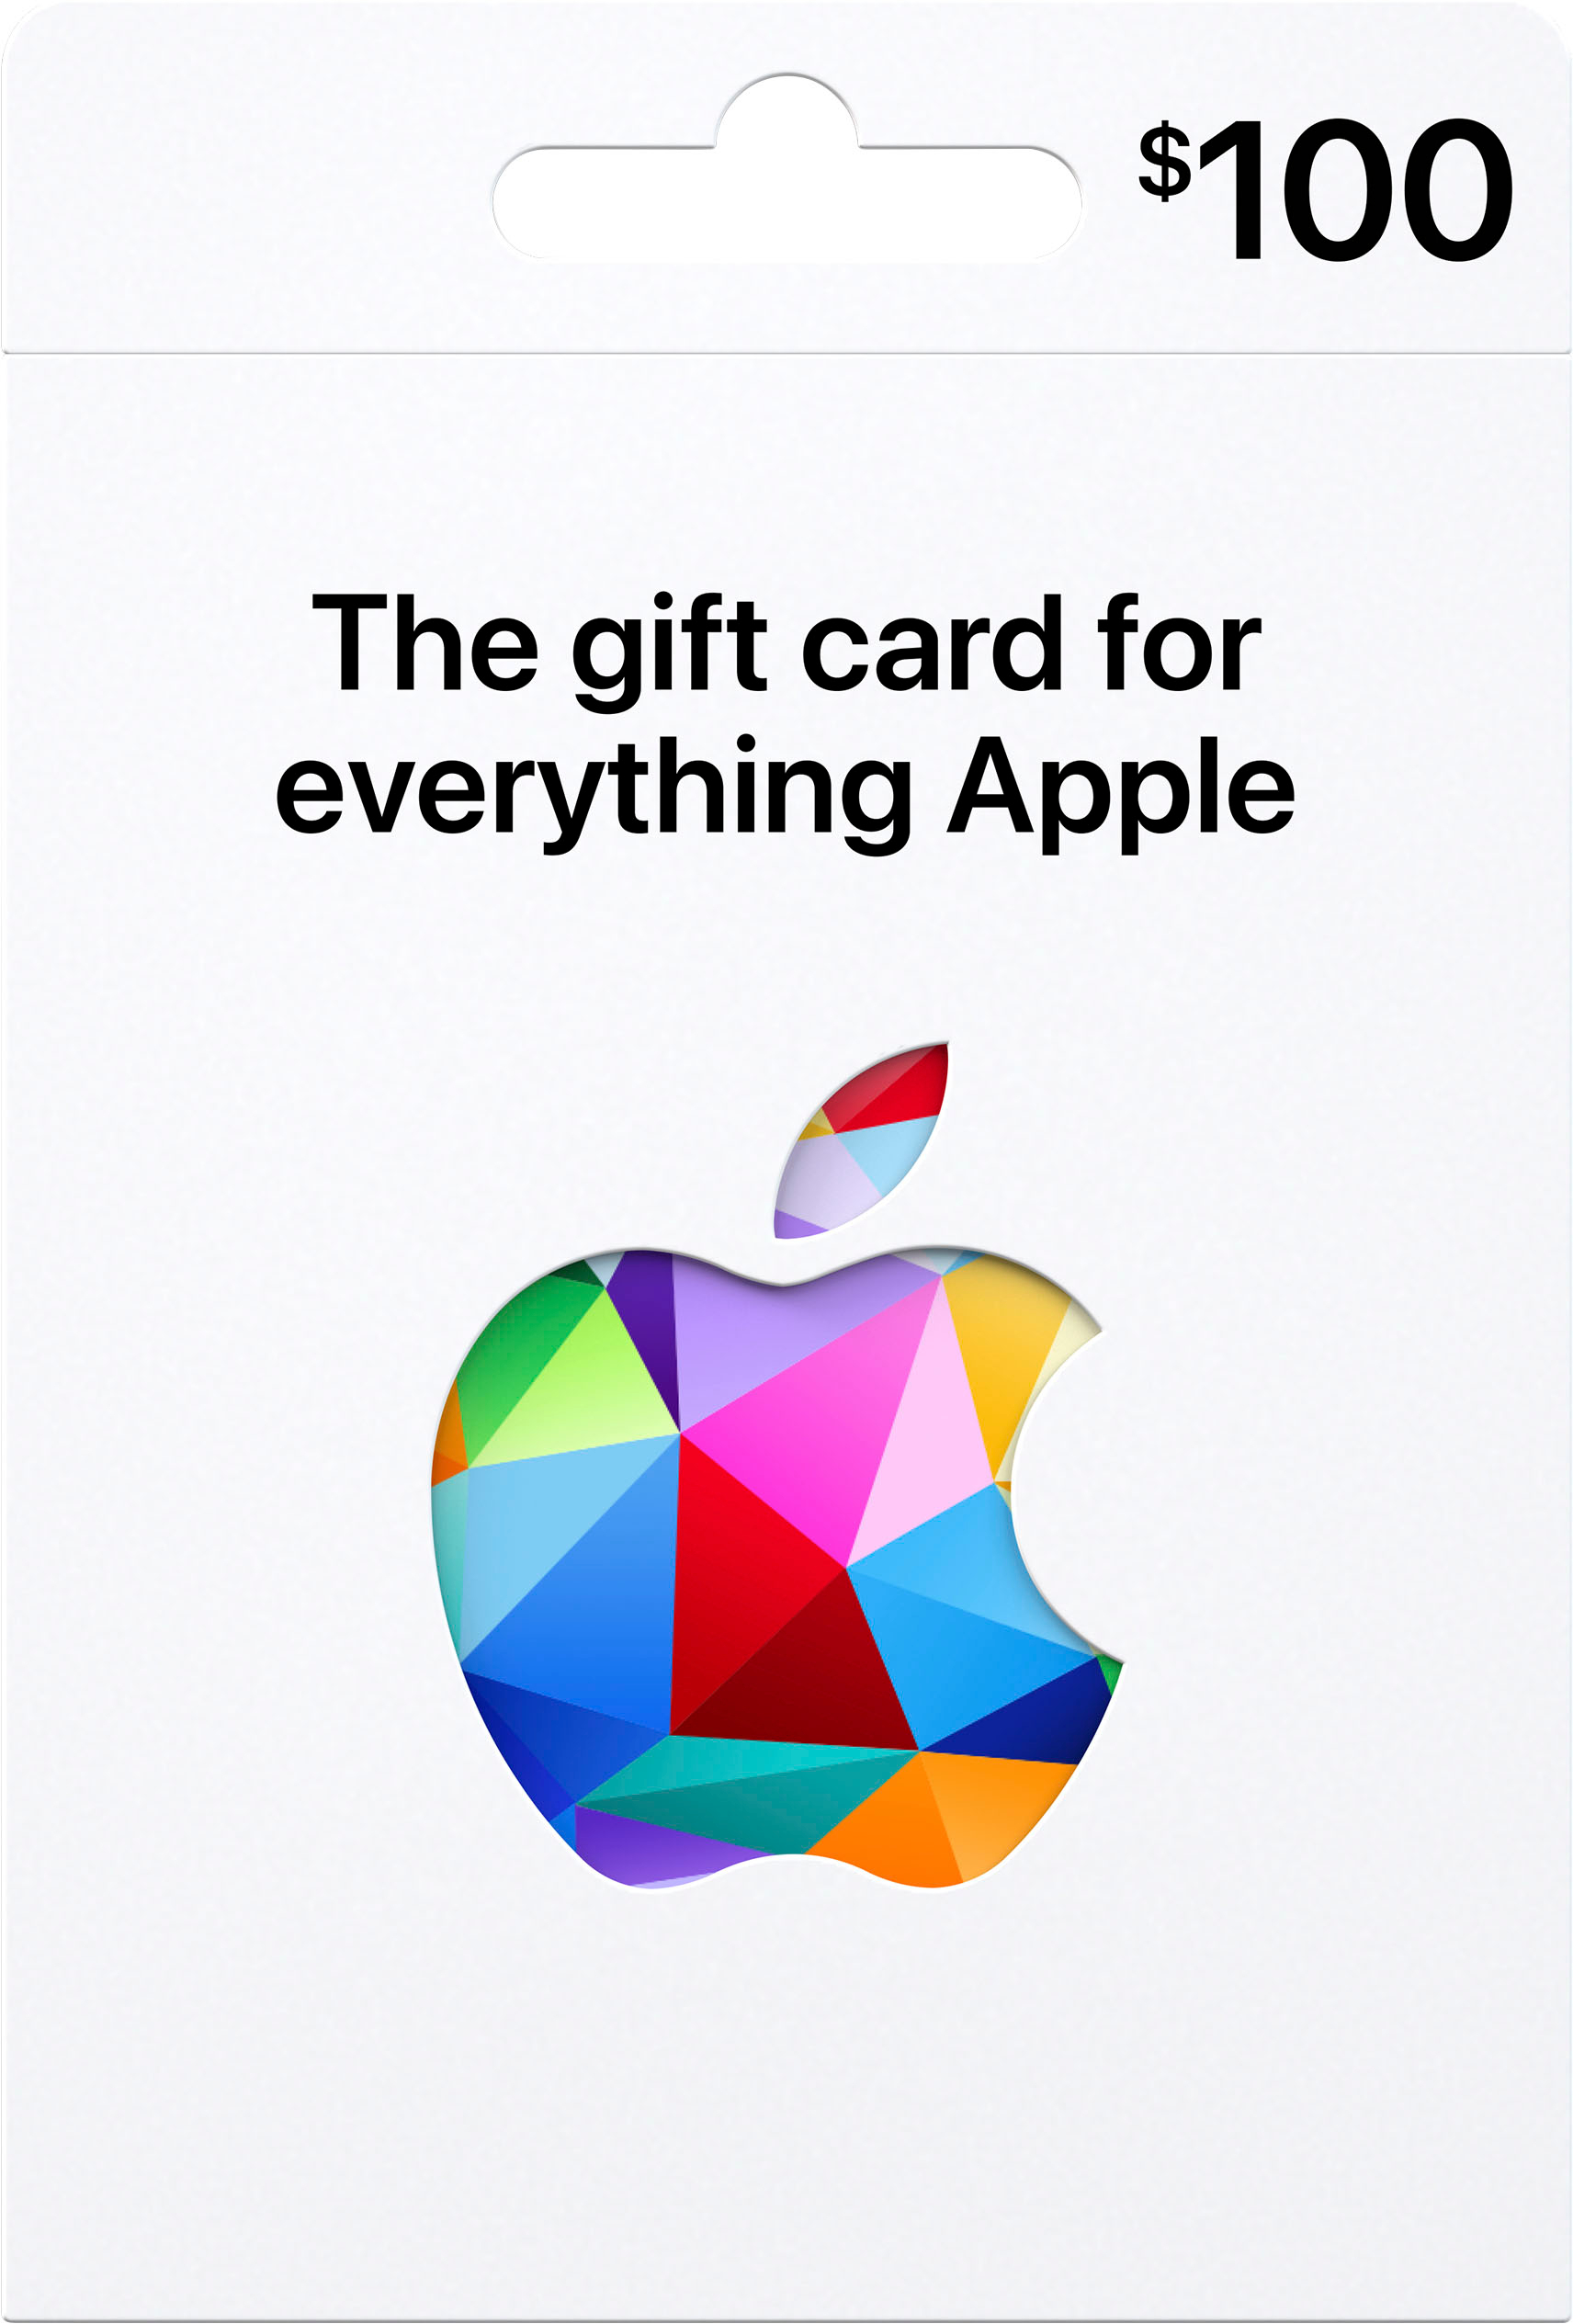 How to add an apple gift card to your phone Apple 100 Gift Card App Store Music Itunes Iphone Ipad Airpods Accessories And More Apple Gift Card 100 Best Buy